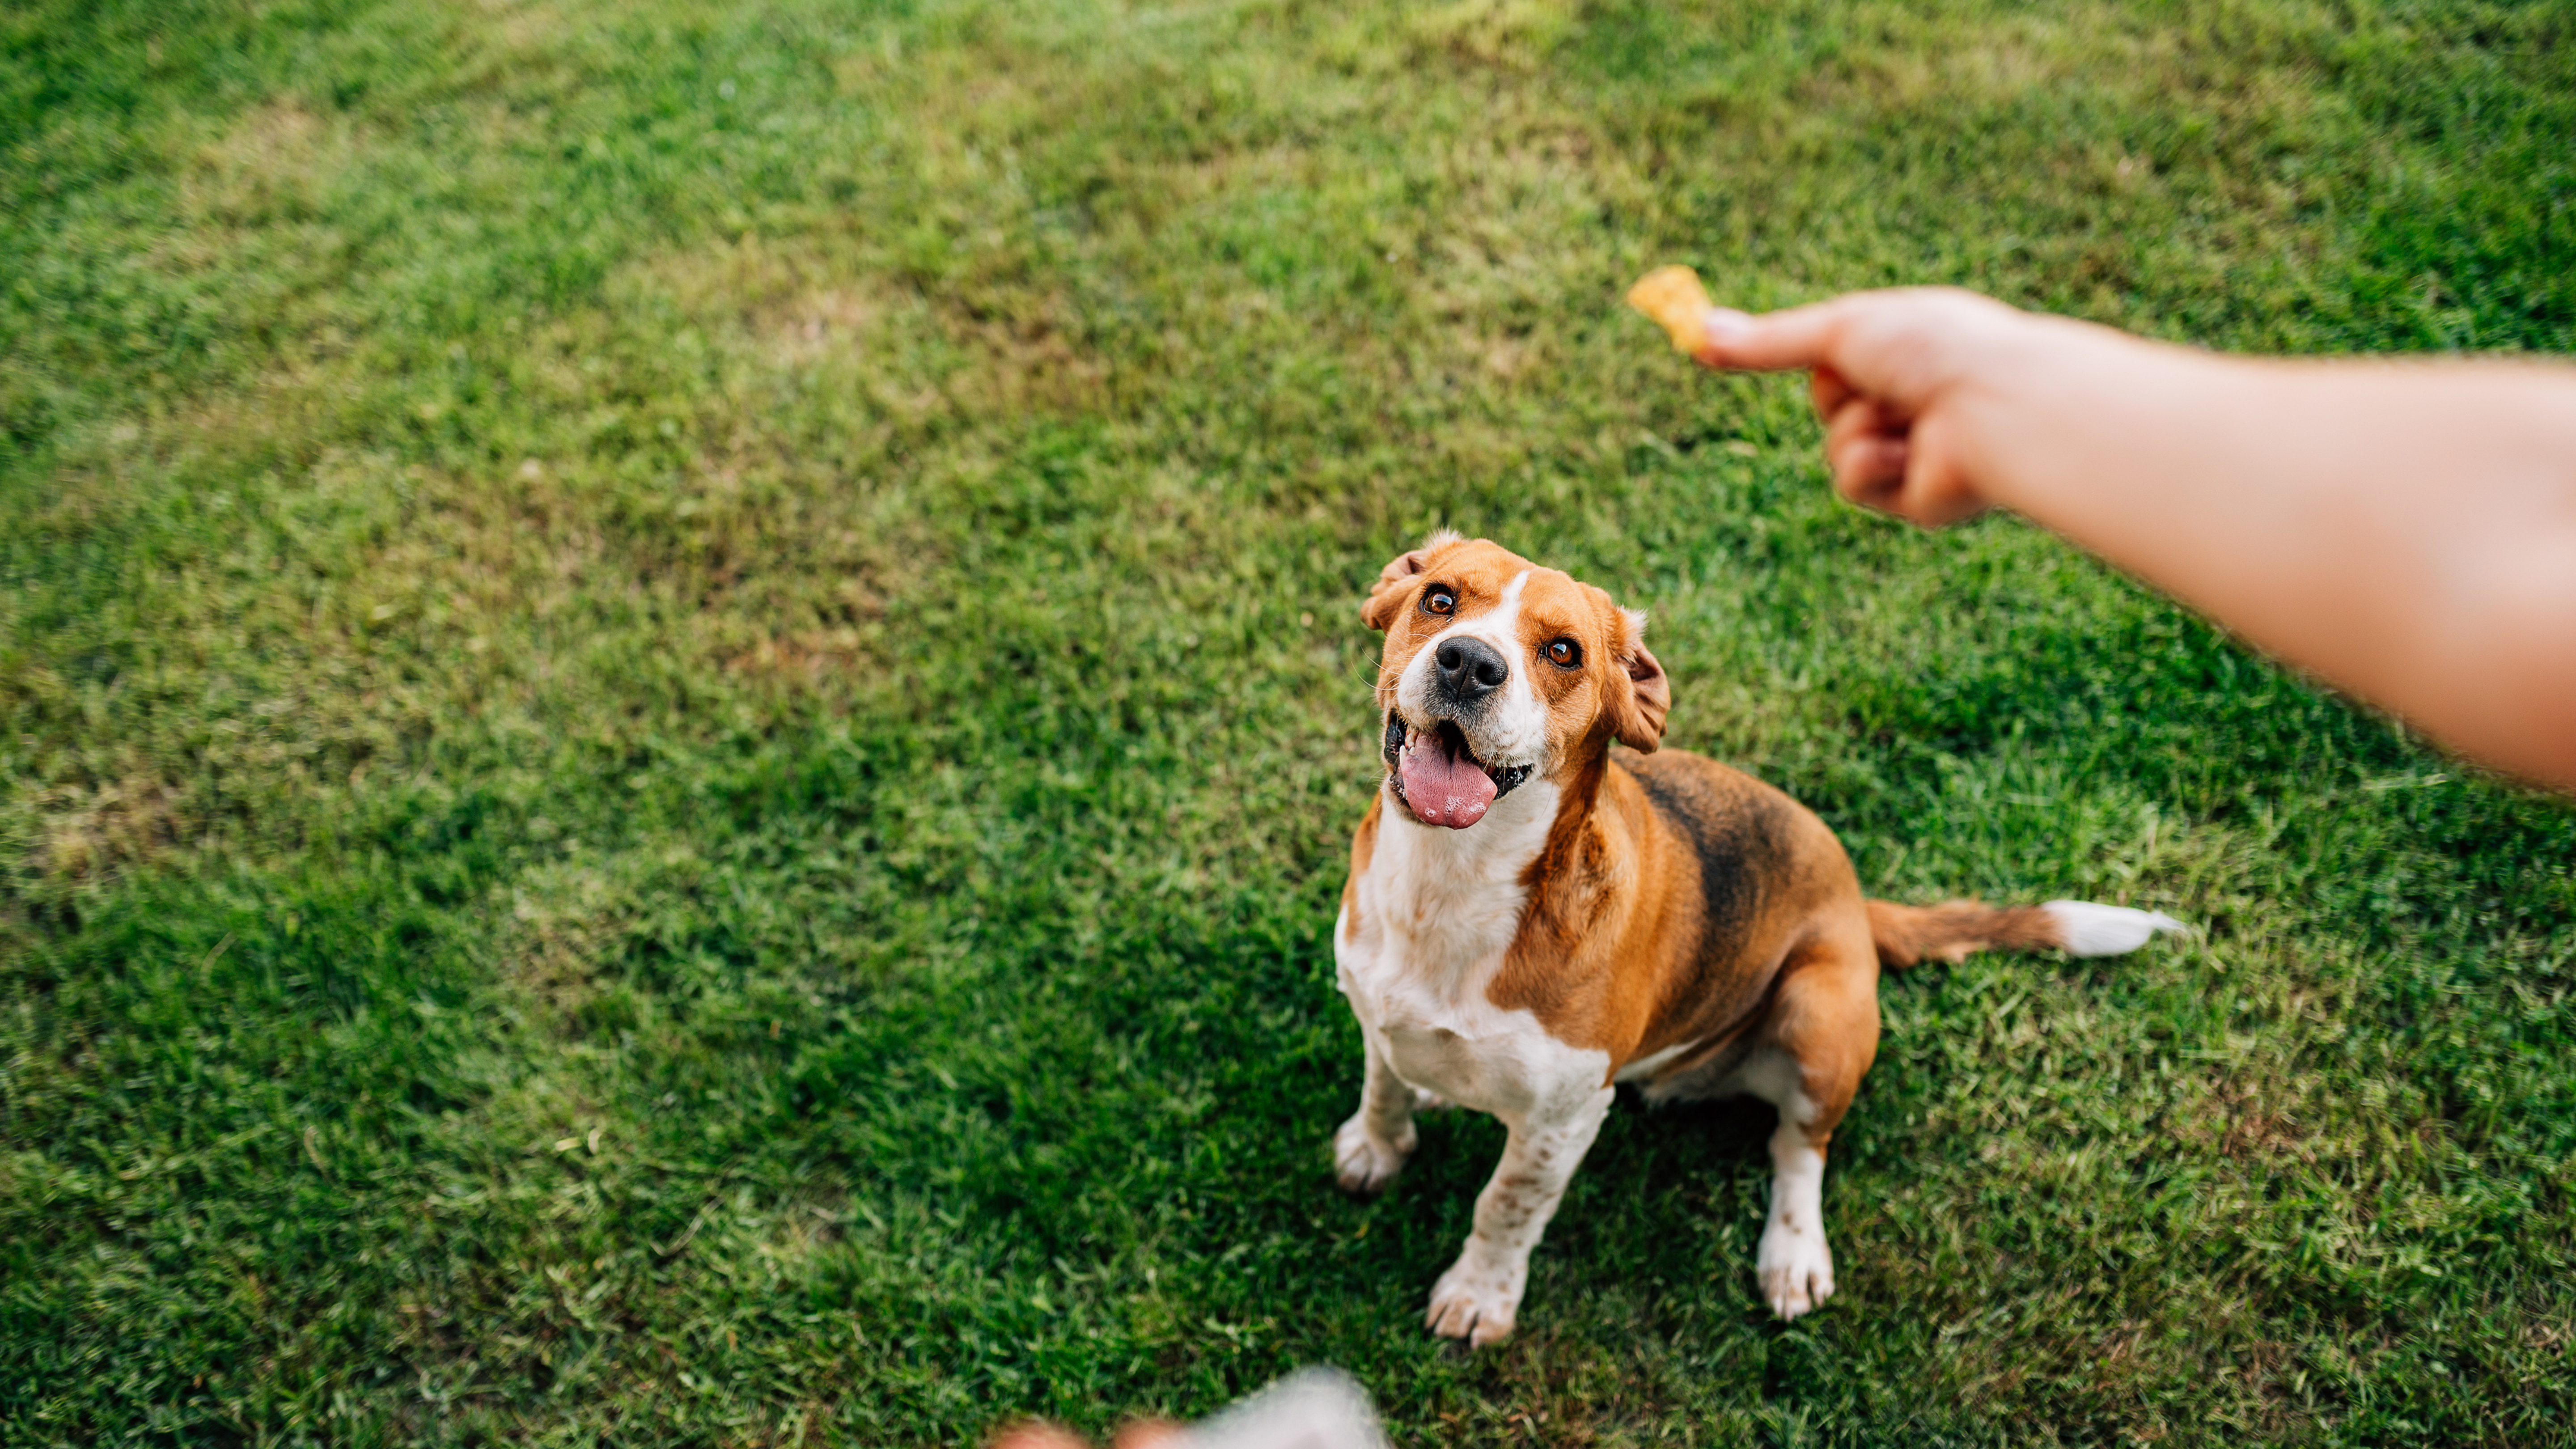 Giving your dog a treat helps let them know that they did a good job.